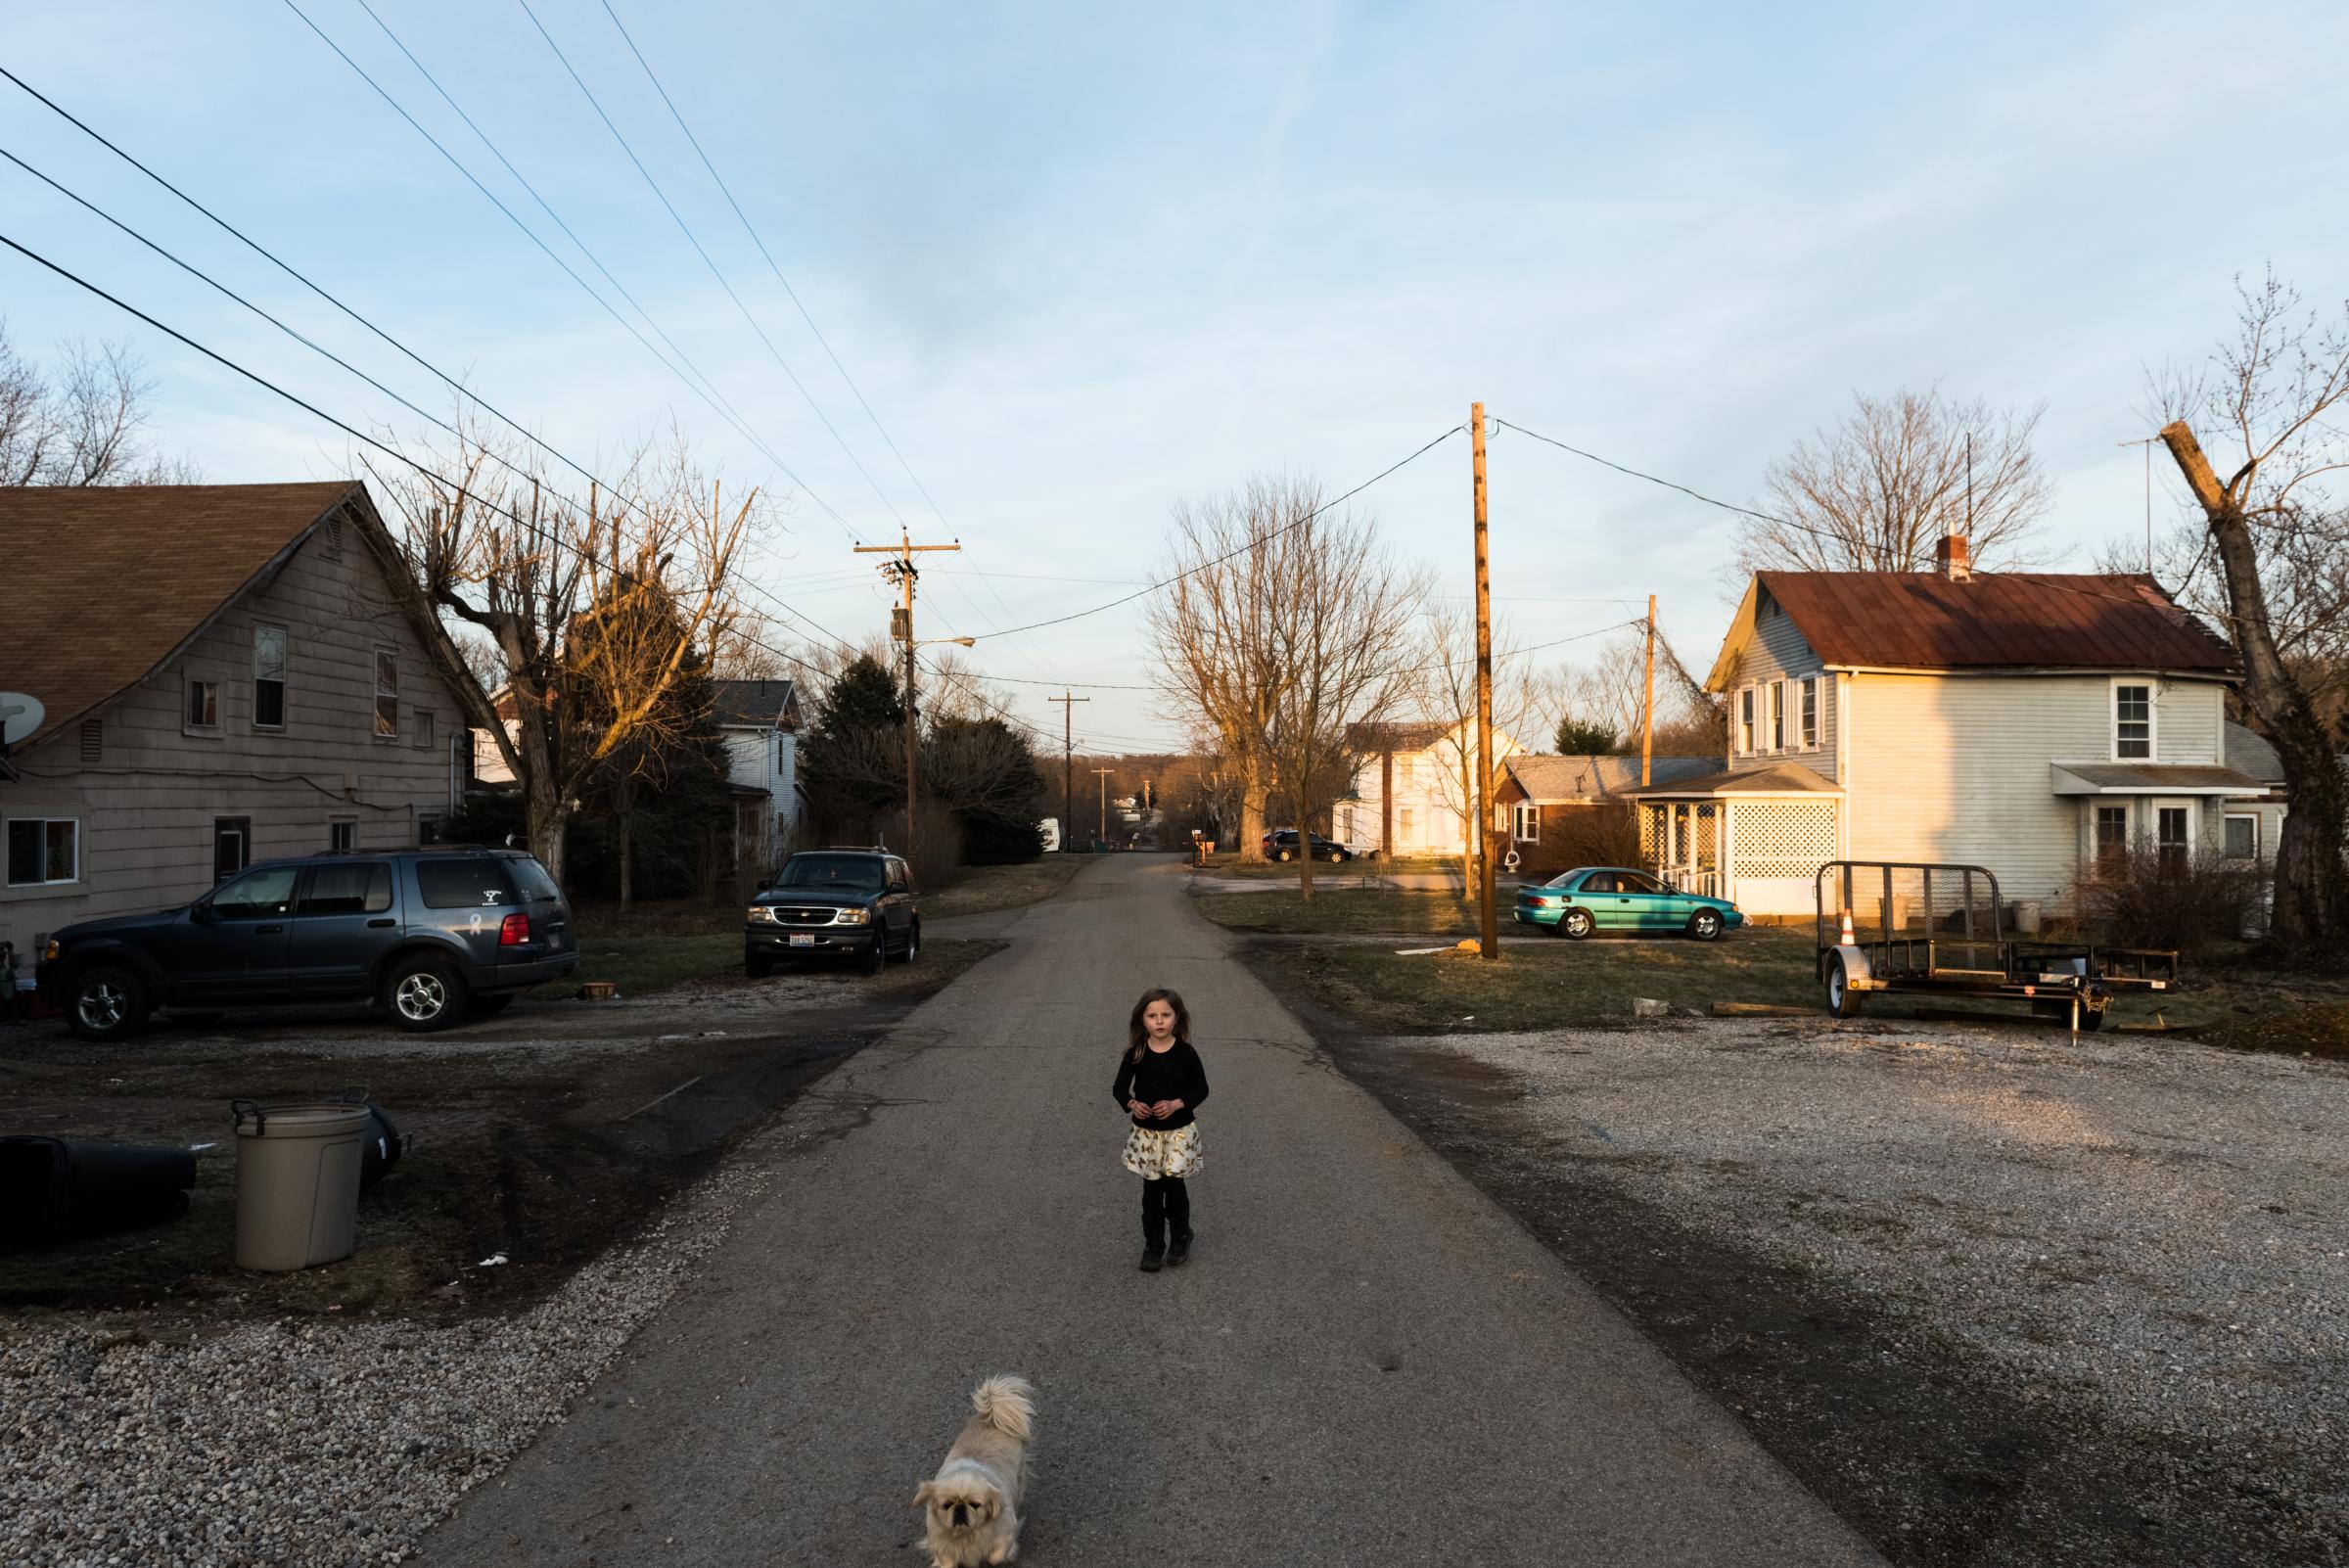 Coolville, Ohio - Chloe Harris and her dog walk down their street in...